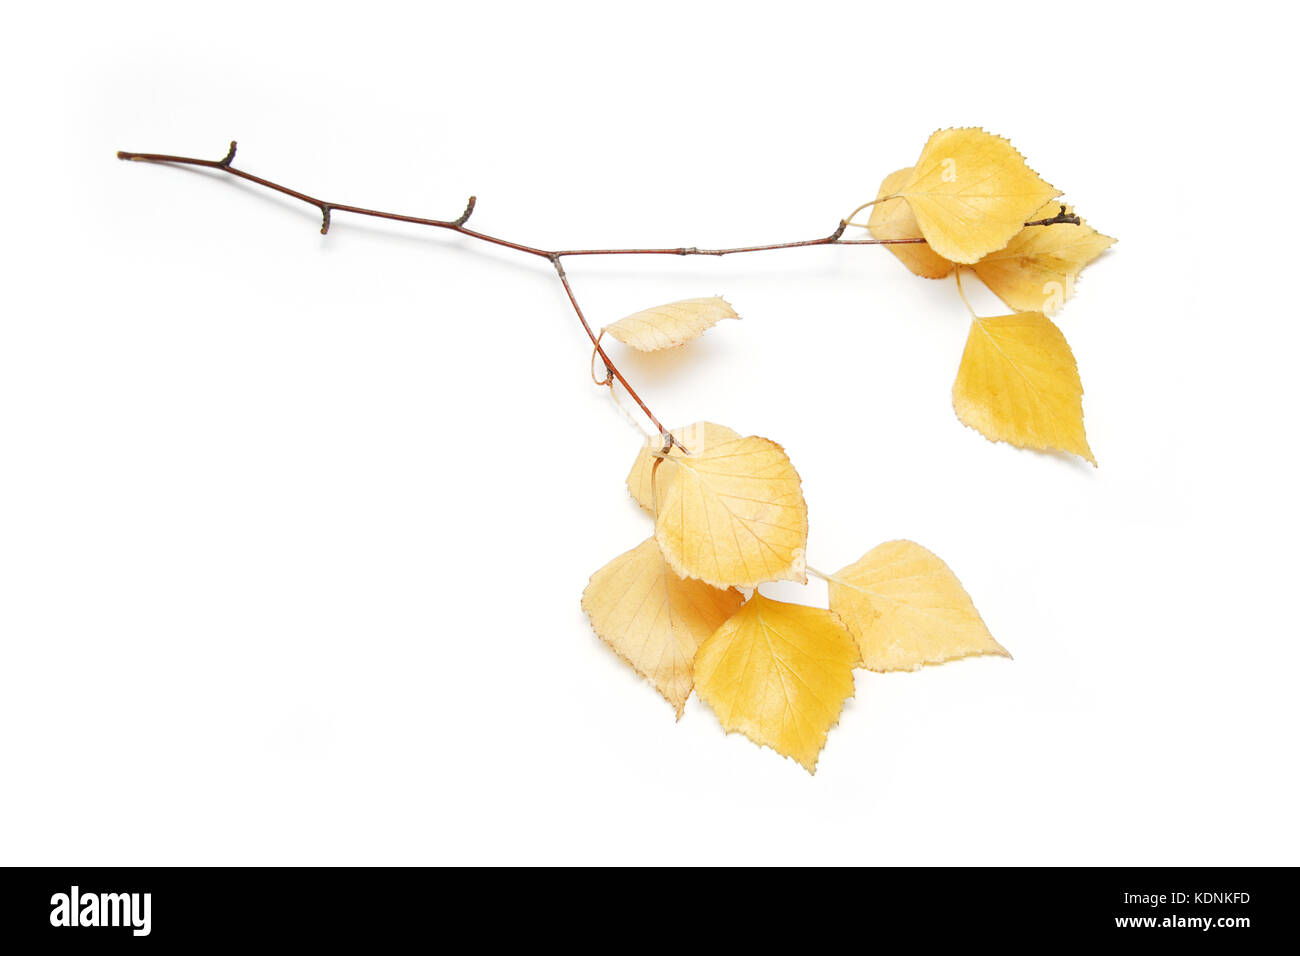 Falling birch leaves isolated on white background. Stock Photo